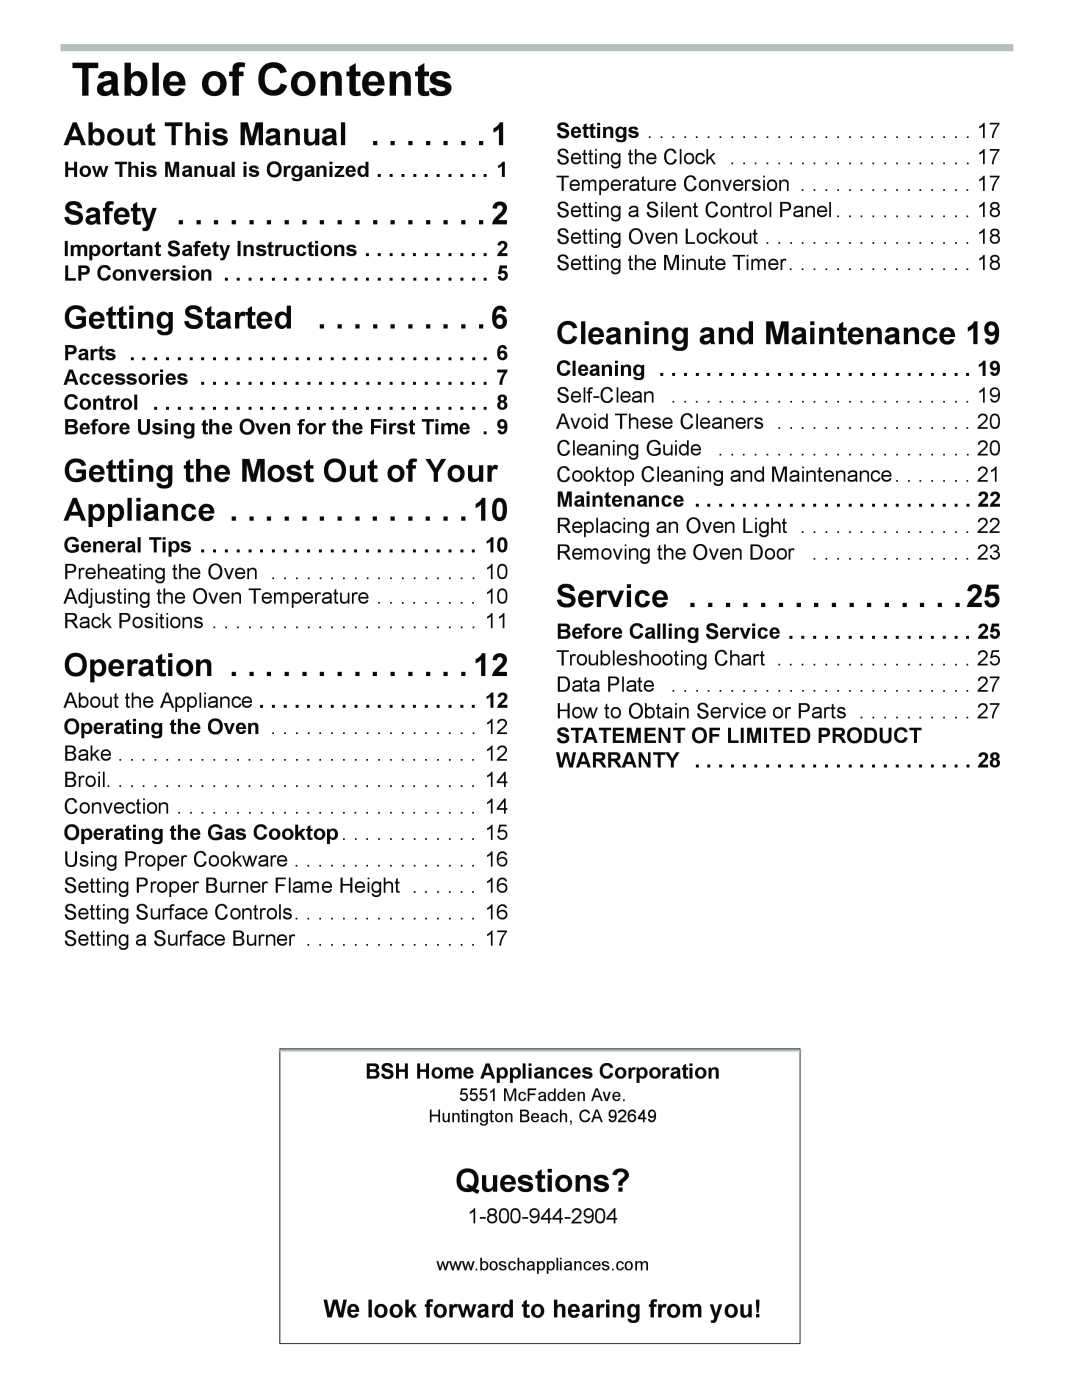 Bosch Appliances HGS3053UC Table of Contents, About This Manual, Safety, Getting Started, Operation, Service, Questions? 